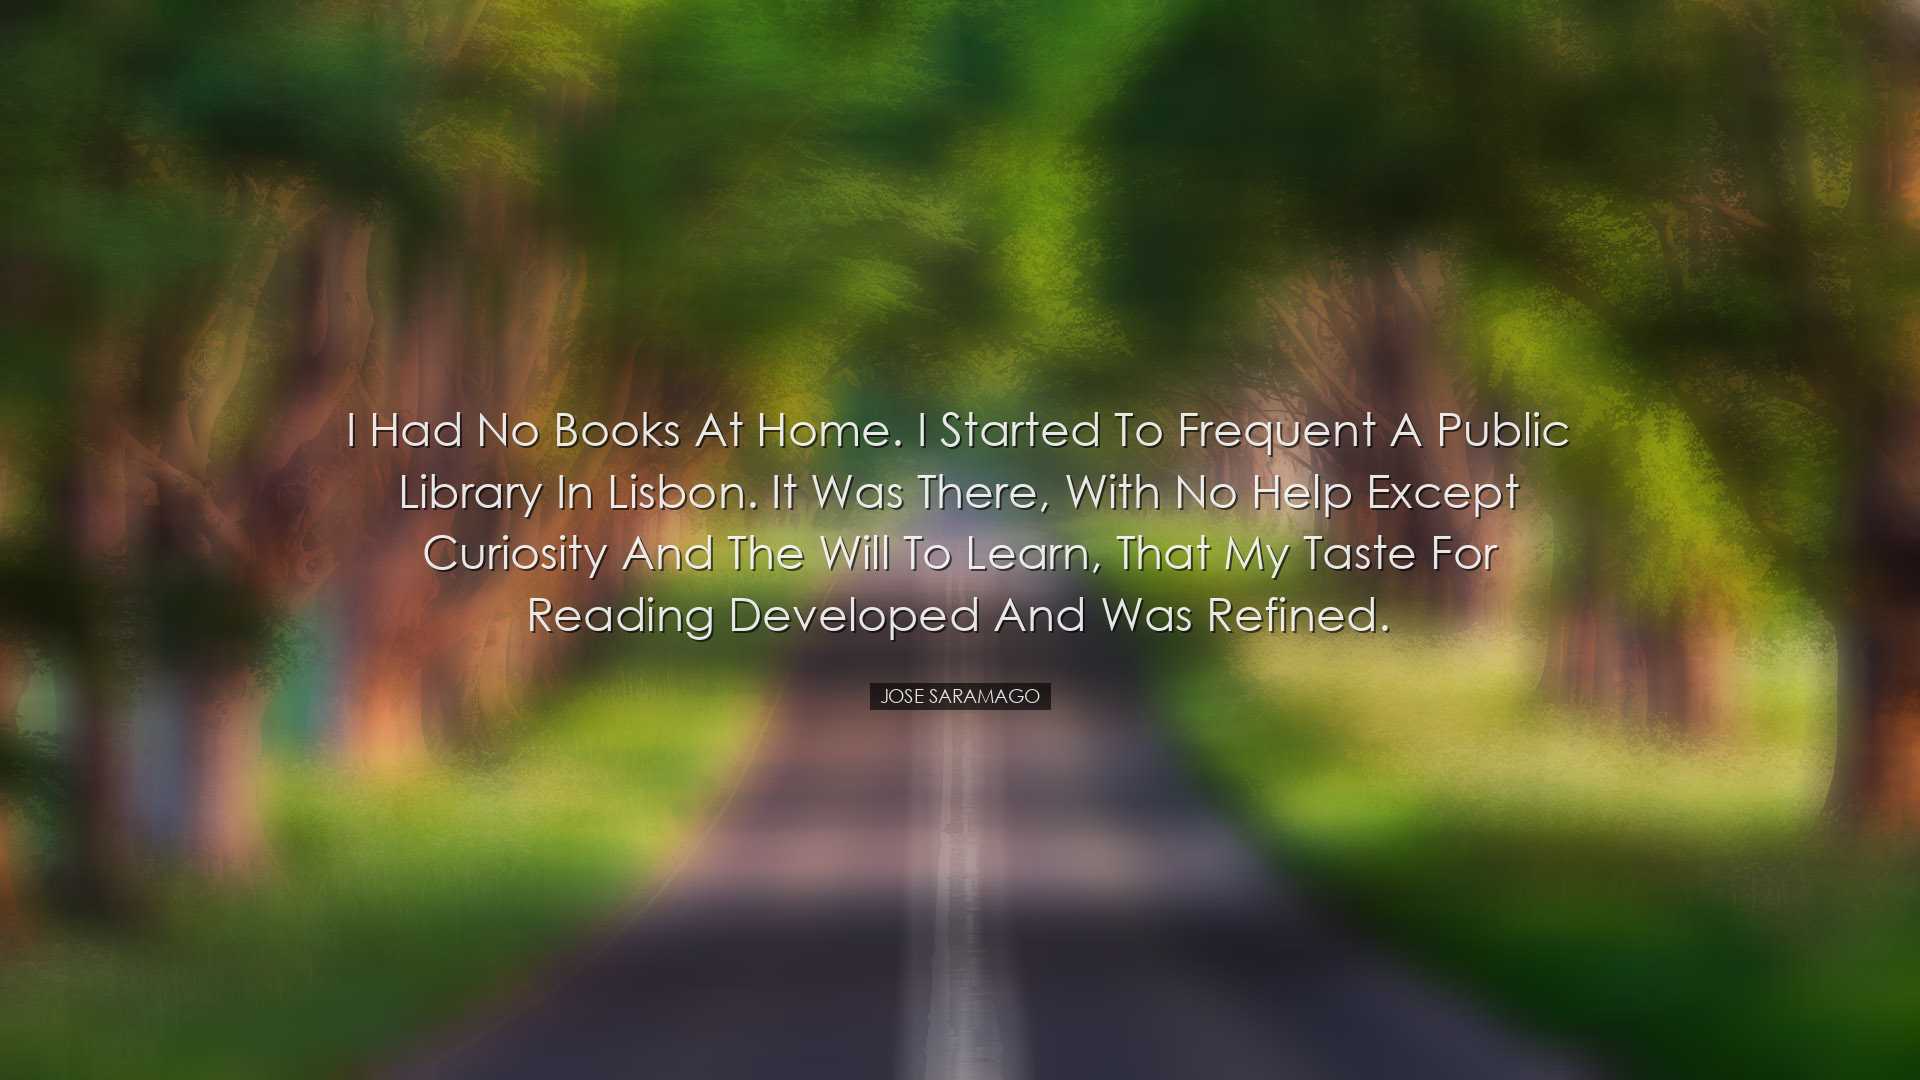 I had no books at home. I started to frequent a public library in